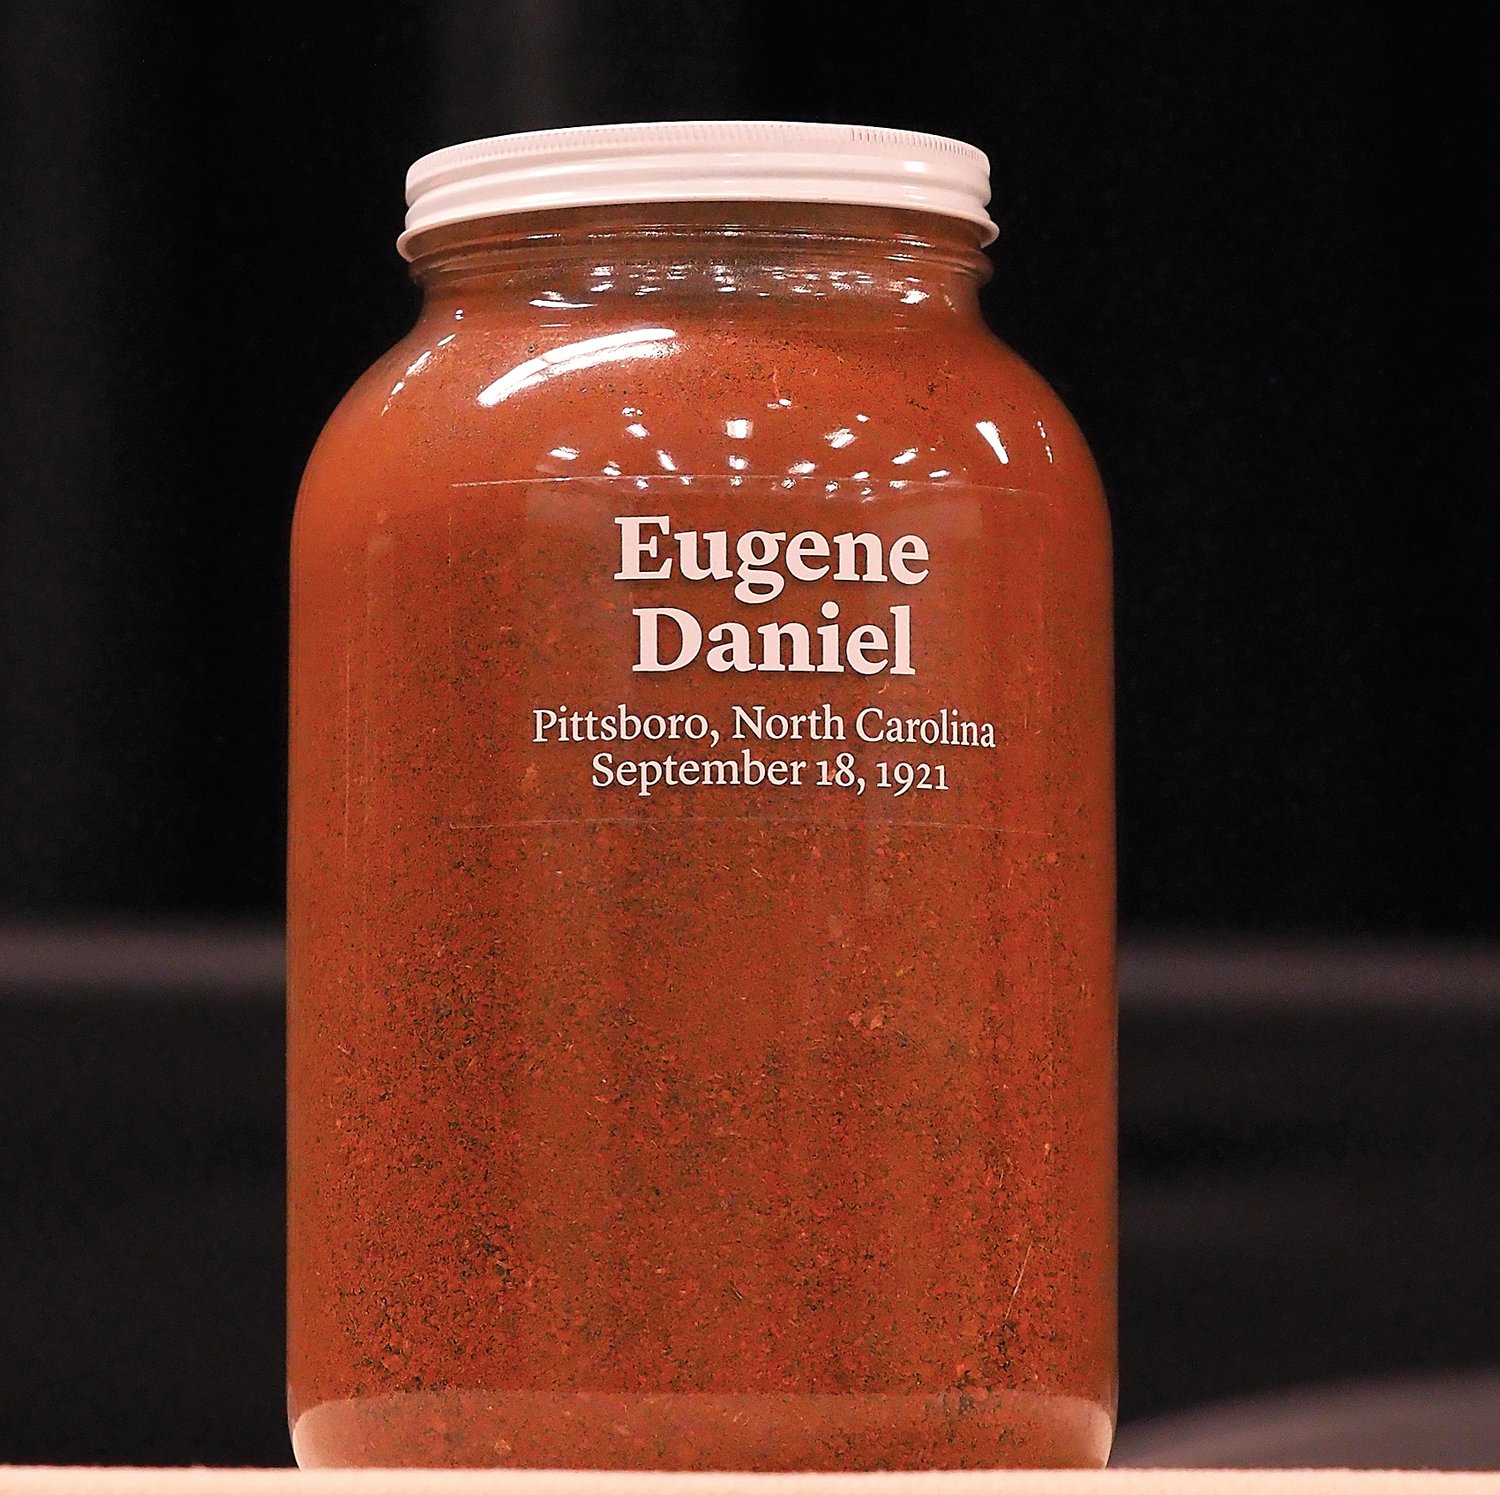 This jar of soil, from Eugene Daniel's lynching site, will go on display at the Equal Justice Initiative's Legacy Museum in Montgomery, Alabama.